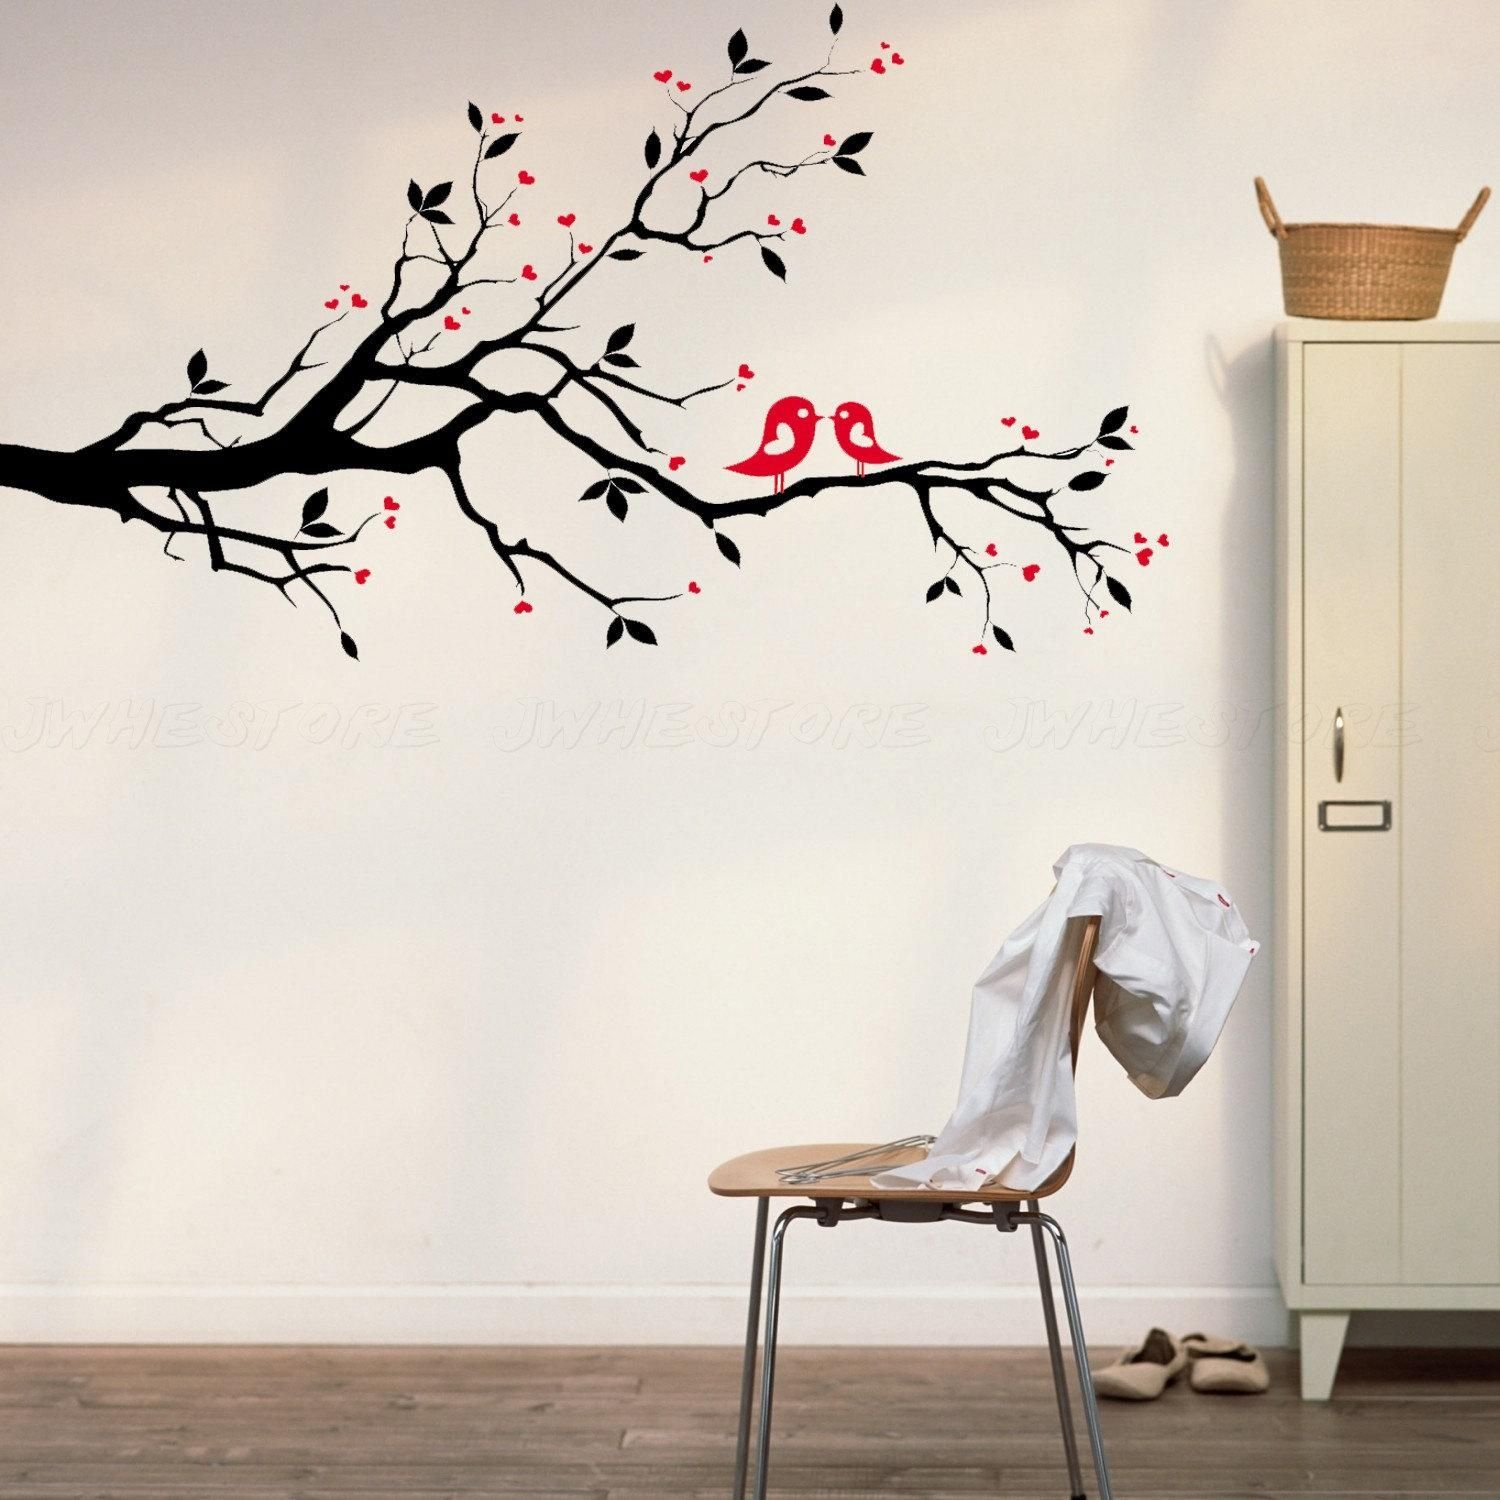 Kids Room. Wall Decal Ideas For Wall Decorations: Black Red Vinyl Pertaining To Cherry Blossom Vinyl Wall Art (Photo 4 of 20)